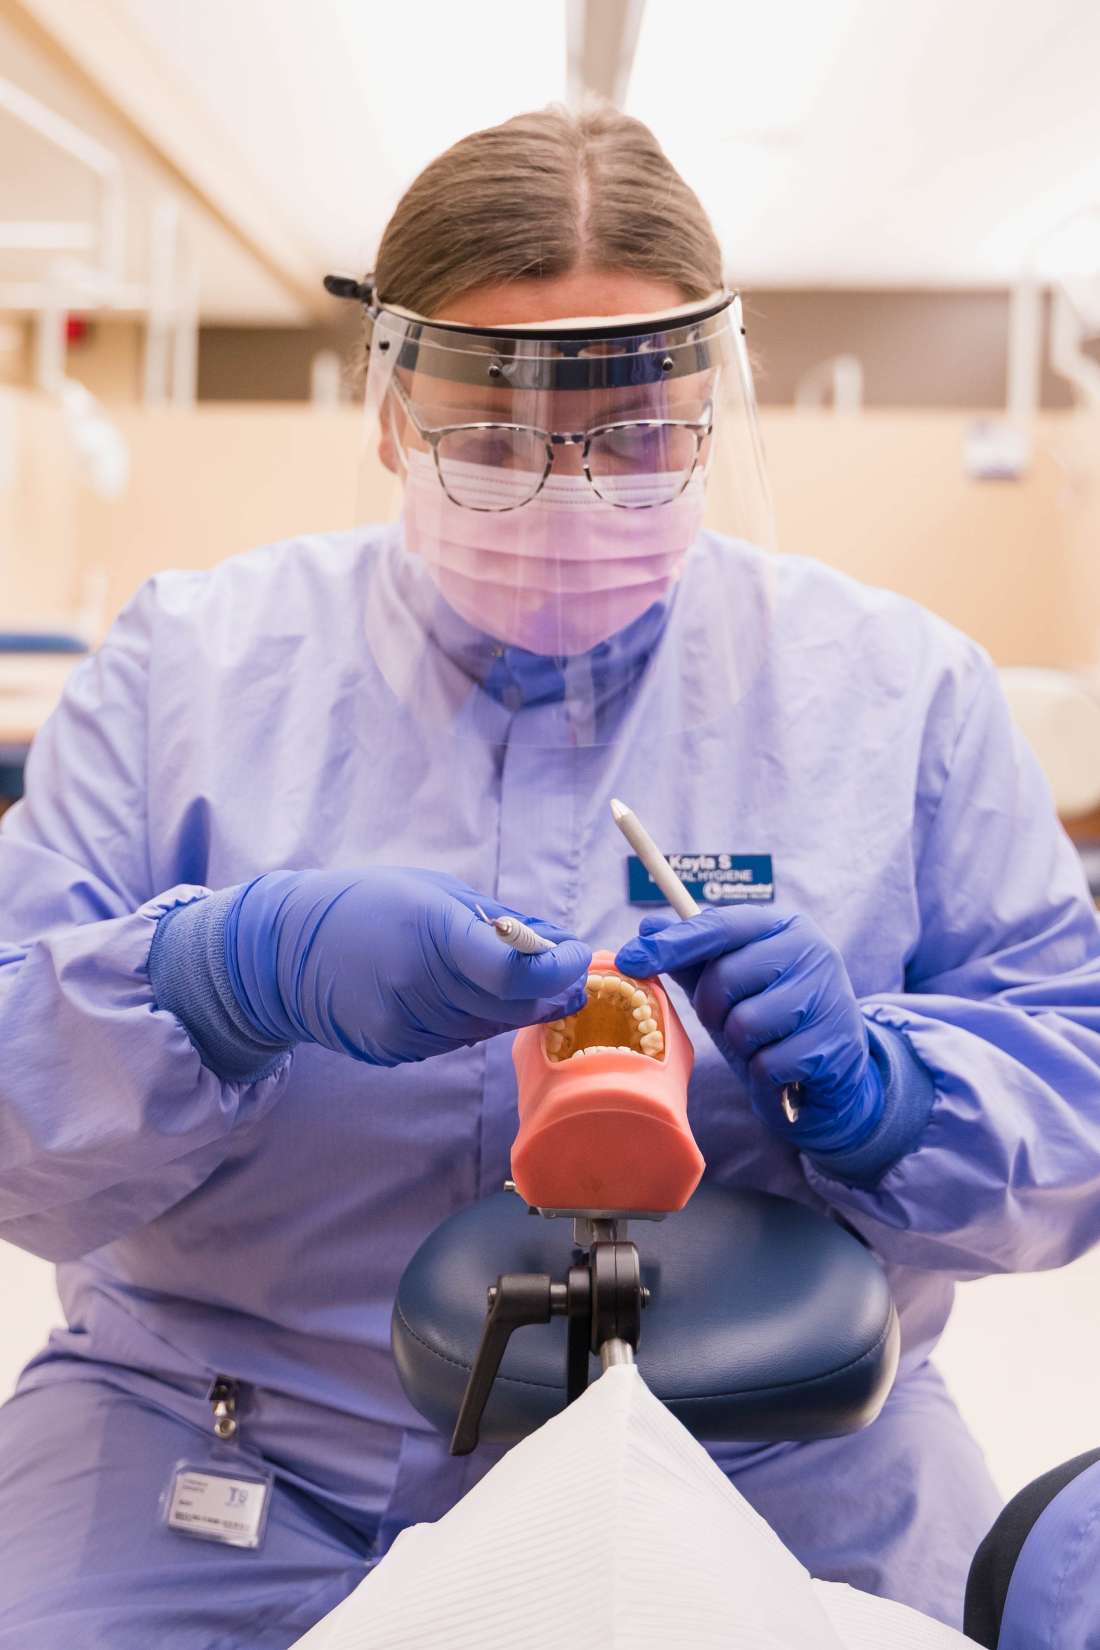 A dental hygienist dressed in medical garbs with a face shield performs a medical procedure on dental mouth model.